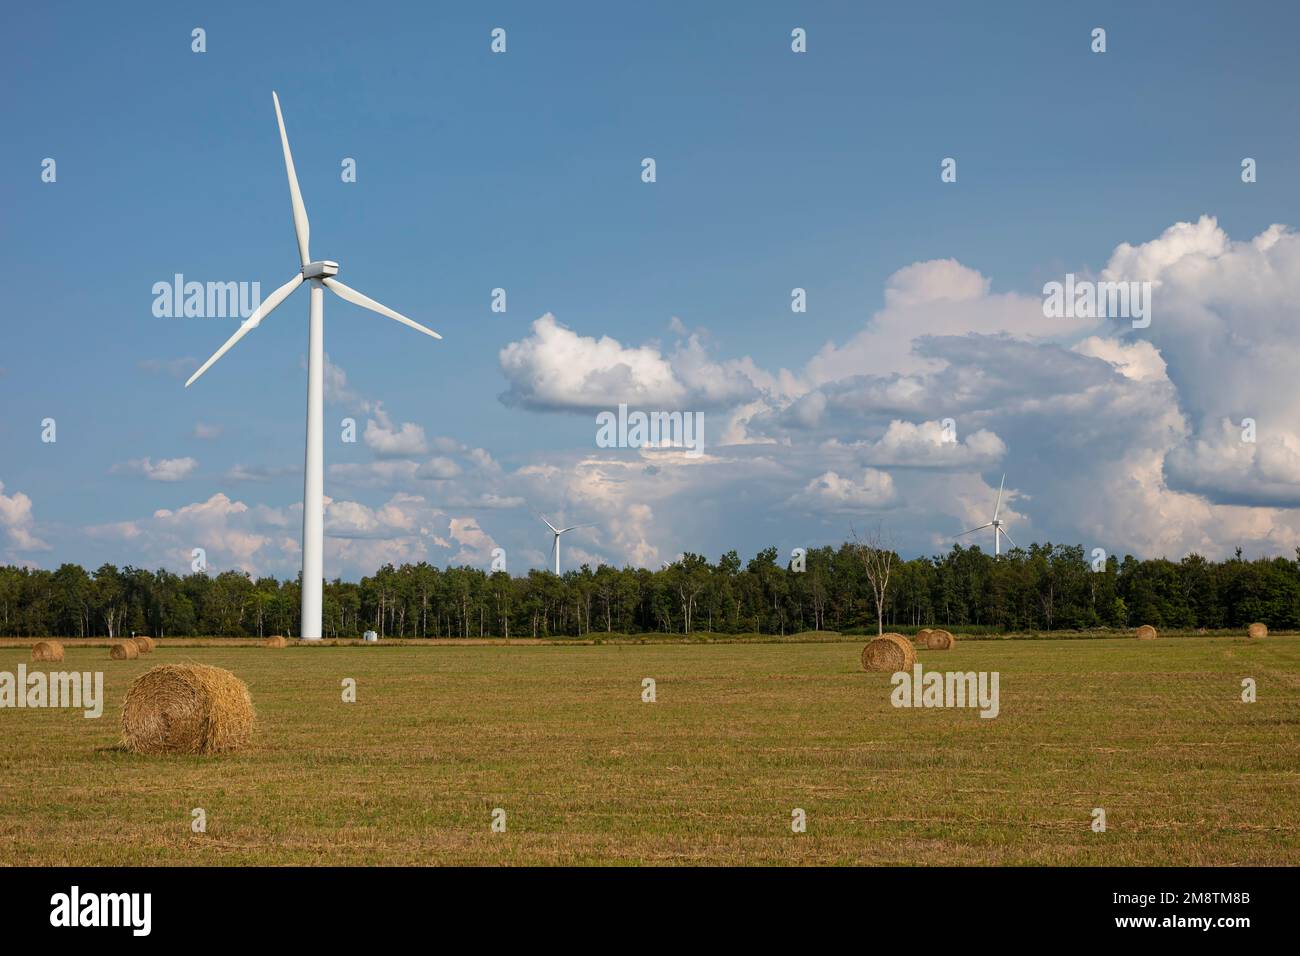 Two industries meet in bales and wind turbines in rural Southern Ontario, Canada, on a warm August day. Stock Photo